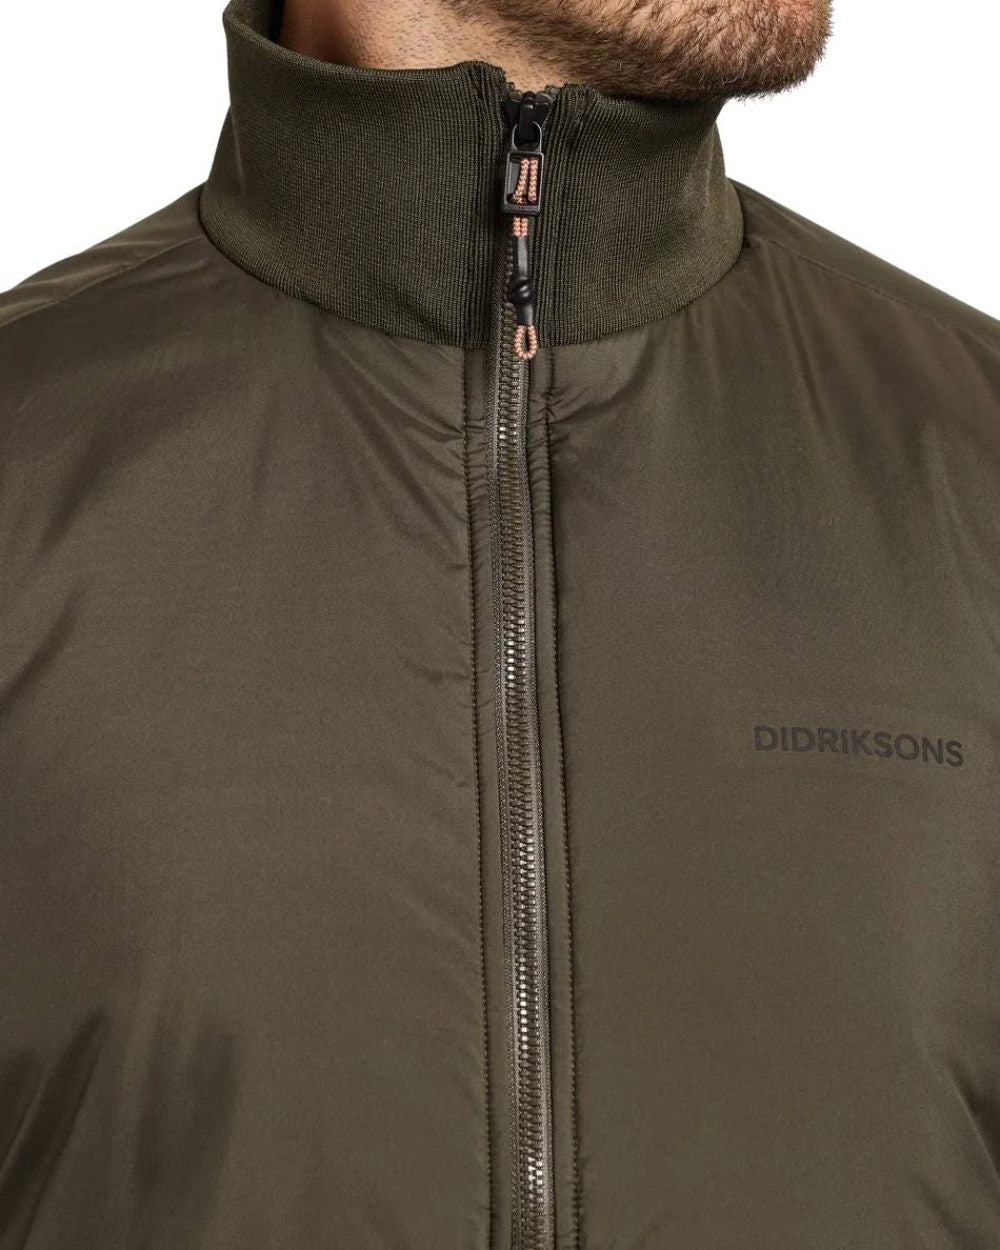 Fog Green Coloured Didriksons Peder Jacket On A White Background 